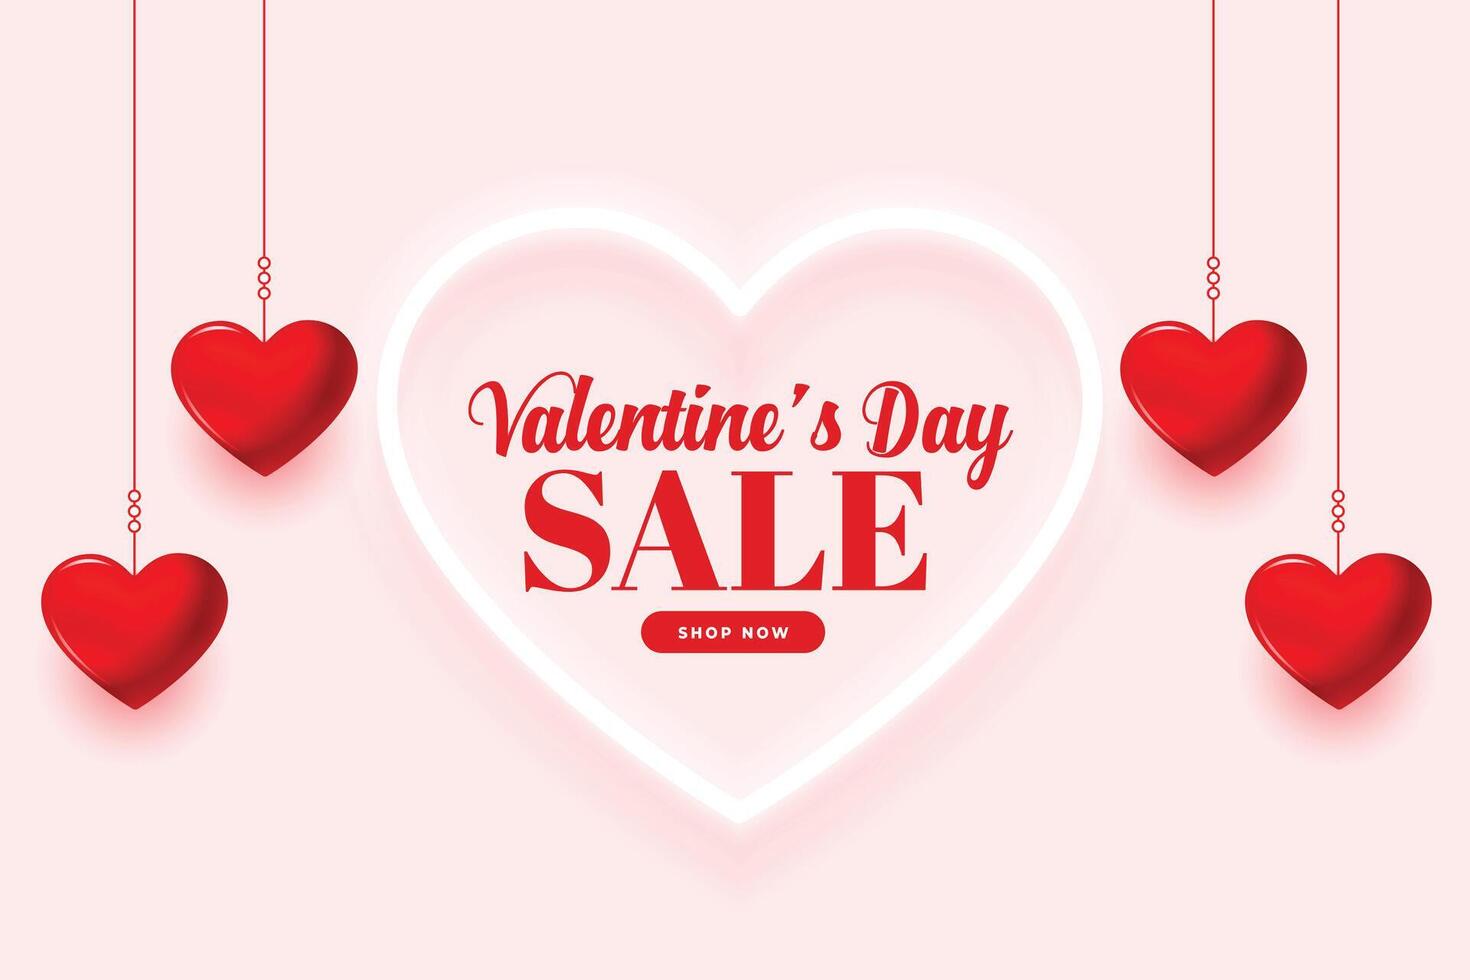 elegant valentines day sale background with hanging hearts vector